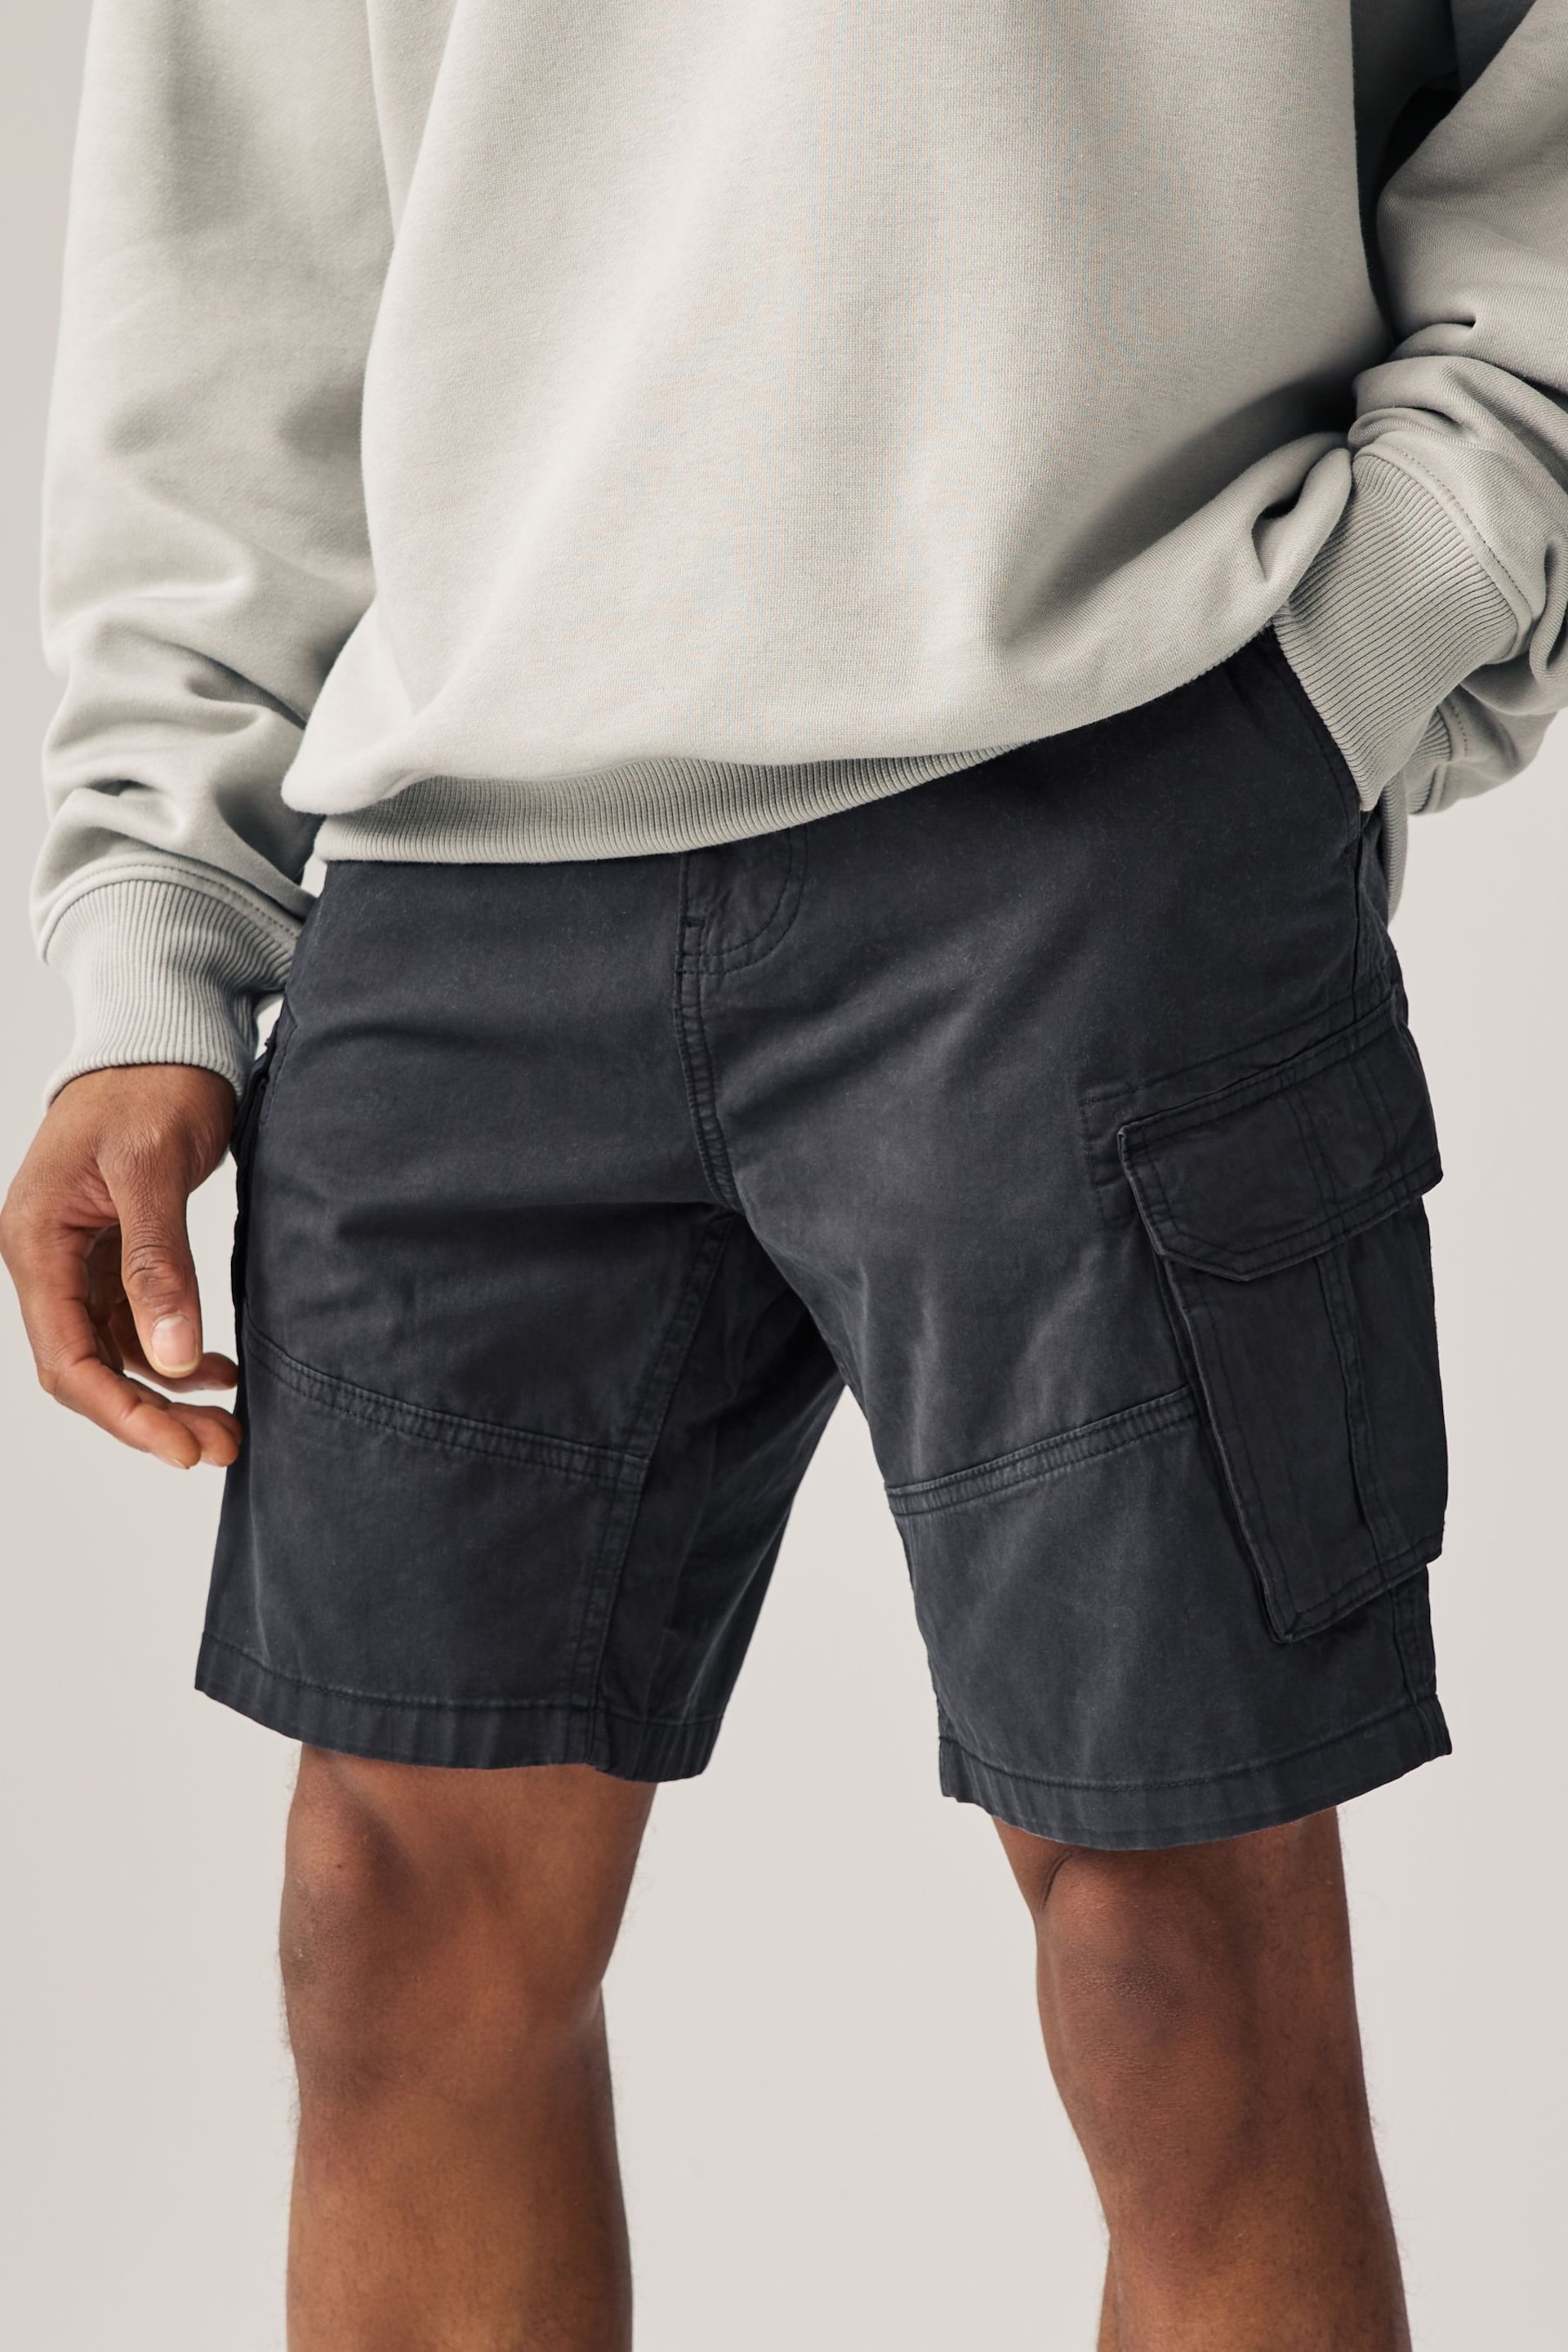 Navy Blue/Stone Natural Cargo Shorts 2 Pack - Image 2 of 13